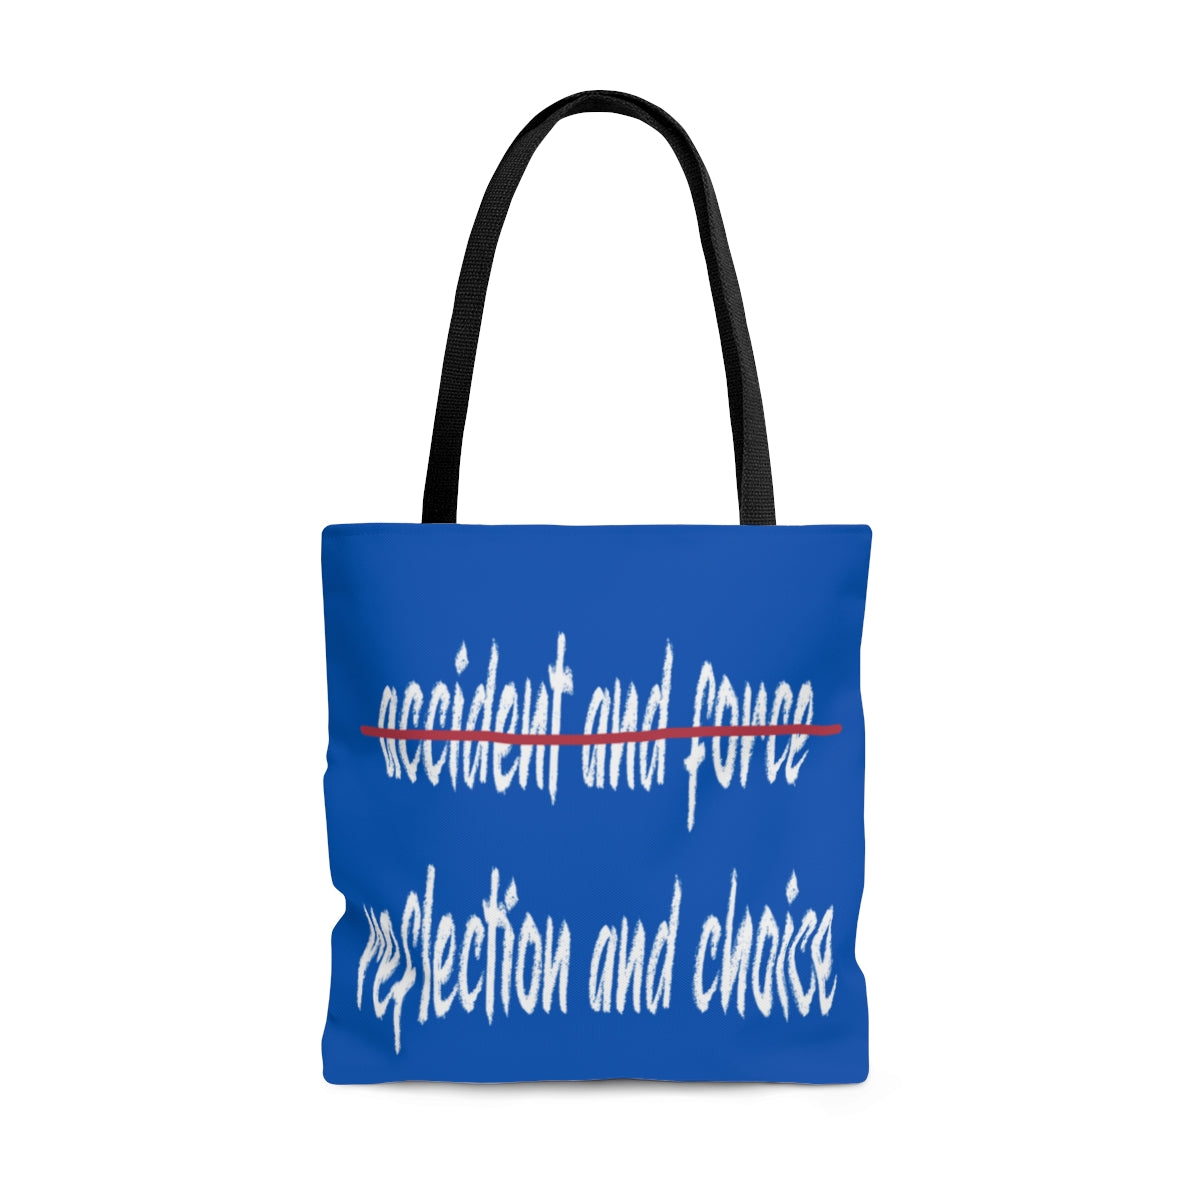 The American Idea Tote Bag--Reflection and Choice